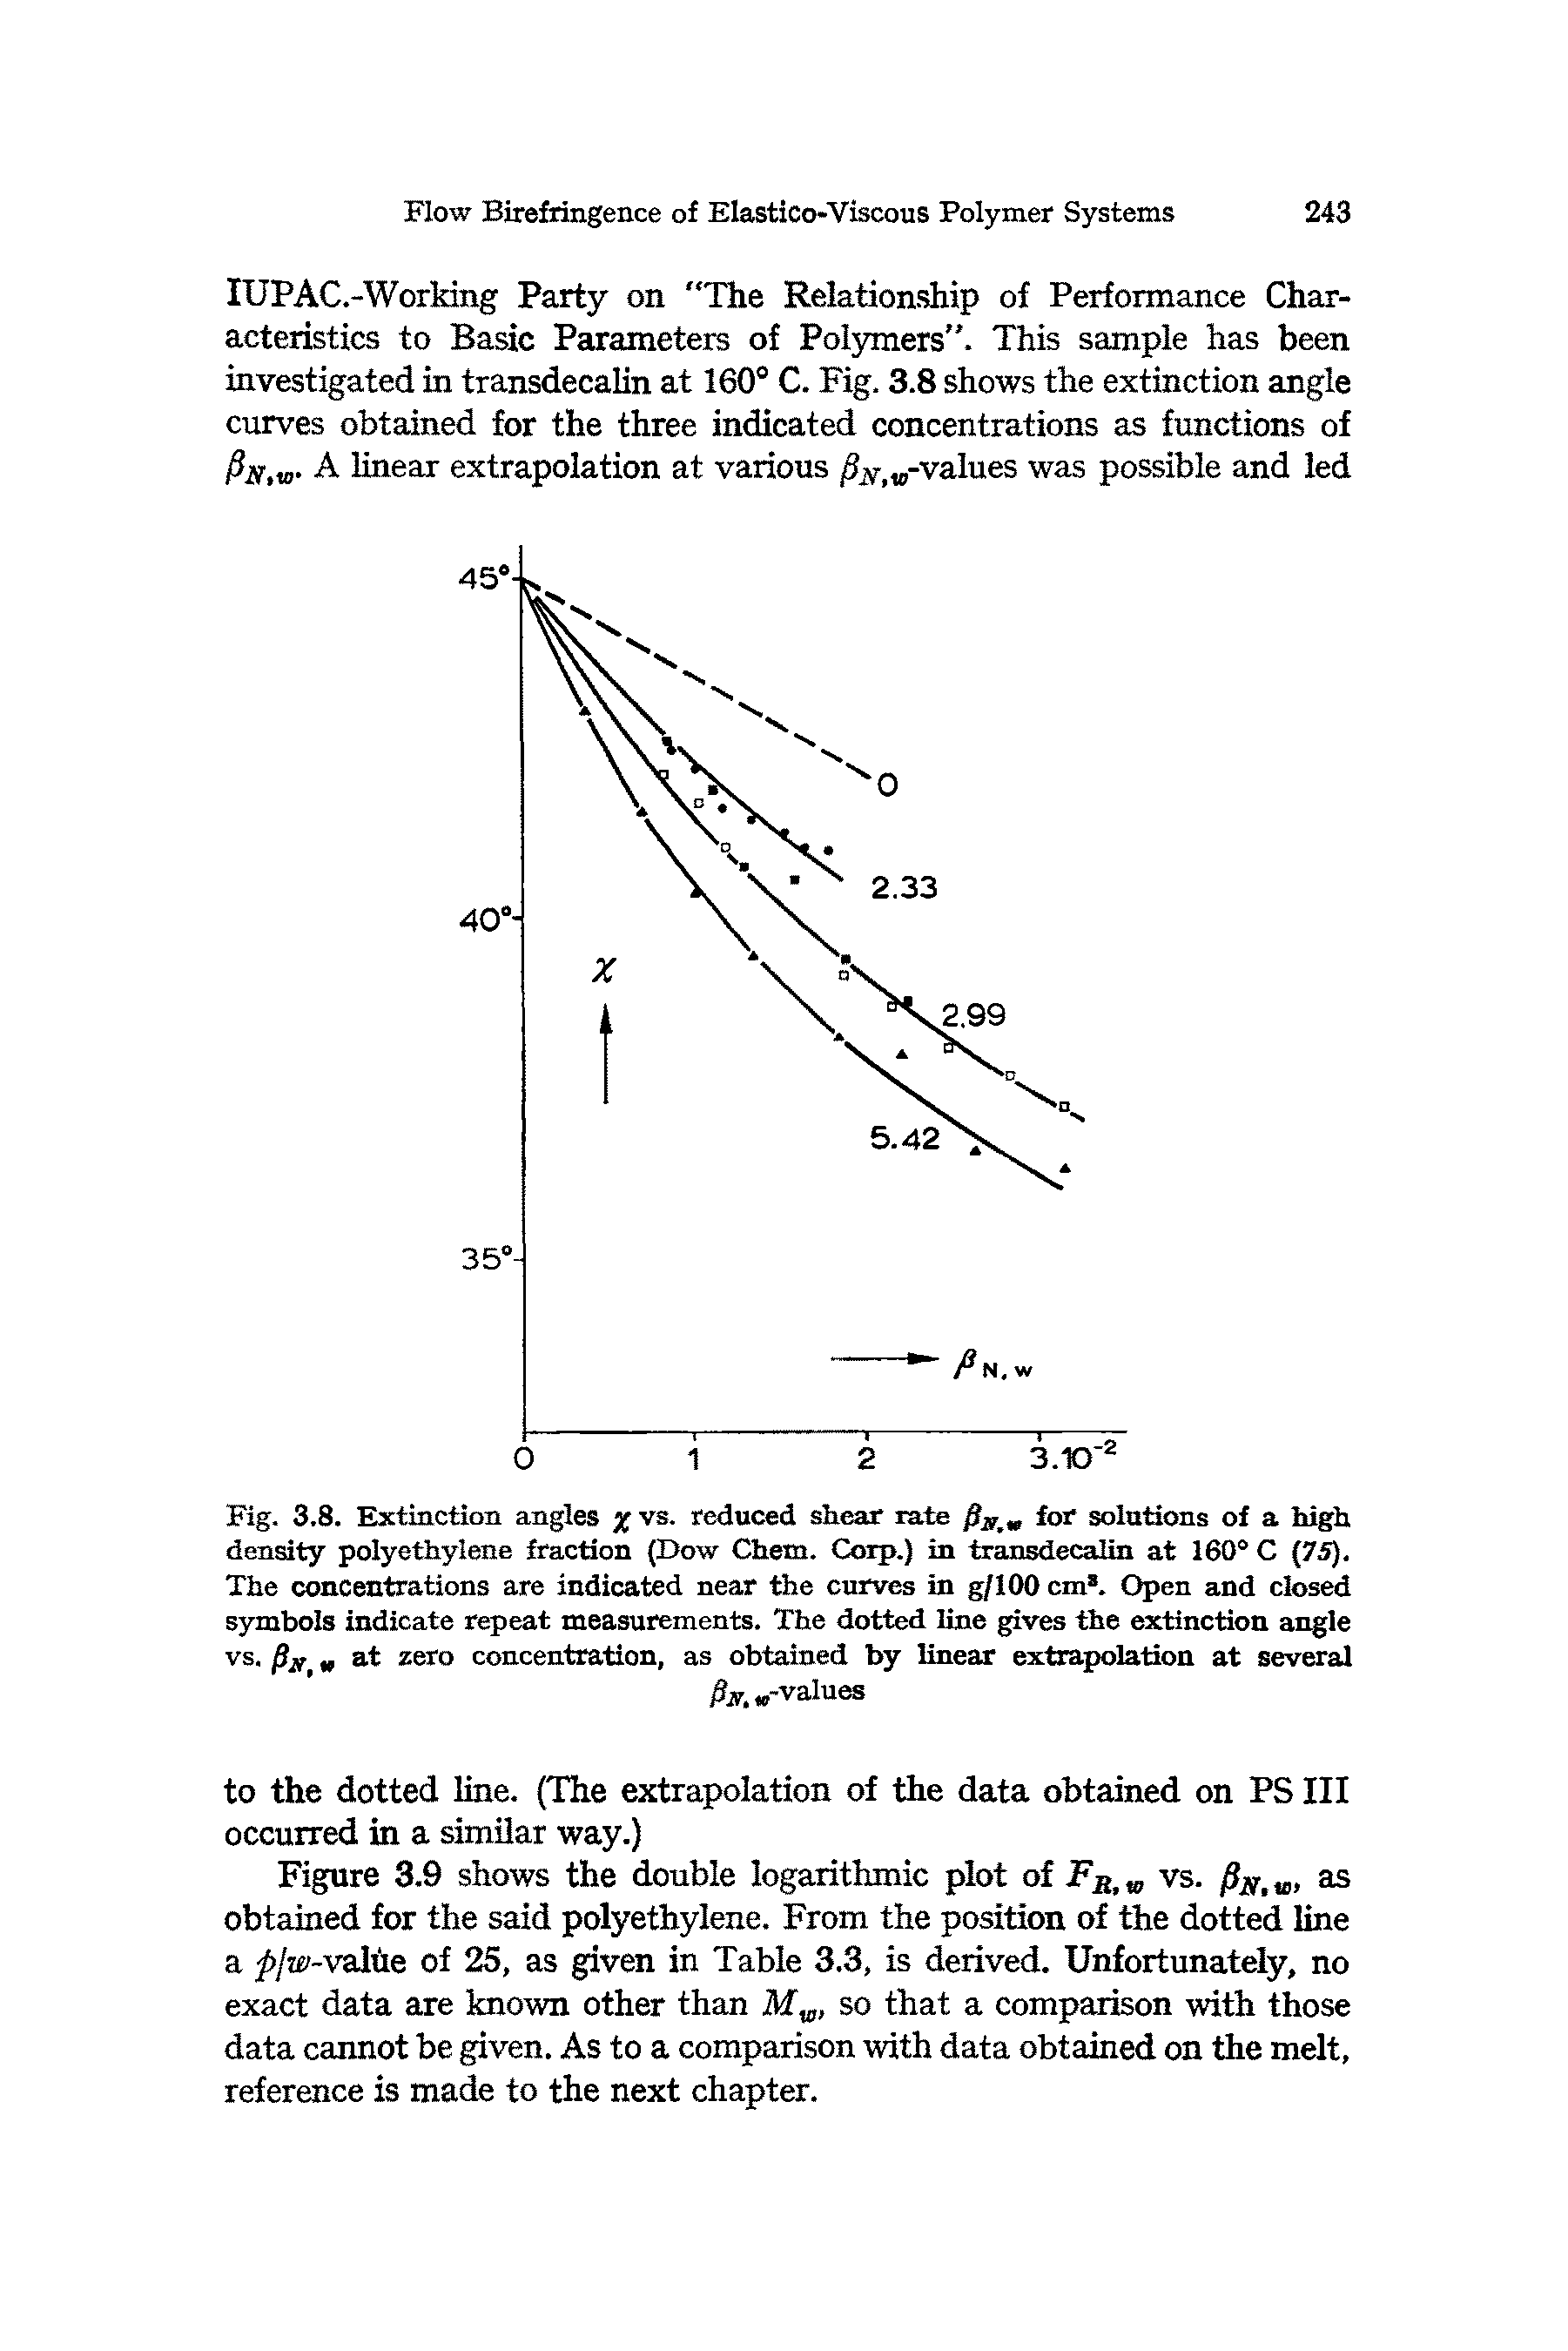 Fig. 3.8. Extinction angles % vs. reduced shear rate for solutions of a high density polyethylene fraction (Dow Chem. Corp.) in transdecalin at 160° C (75). The concentrations are indicated near the curves in g/100 cm. Open and closed symbols indicate repeat measurements. The dotted line gives the extinction angle vs. at zero concentration, as obtained by linear extrapolation at several...